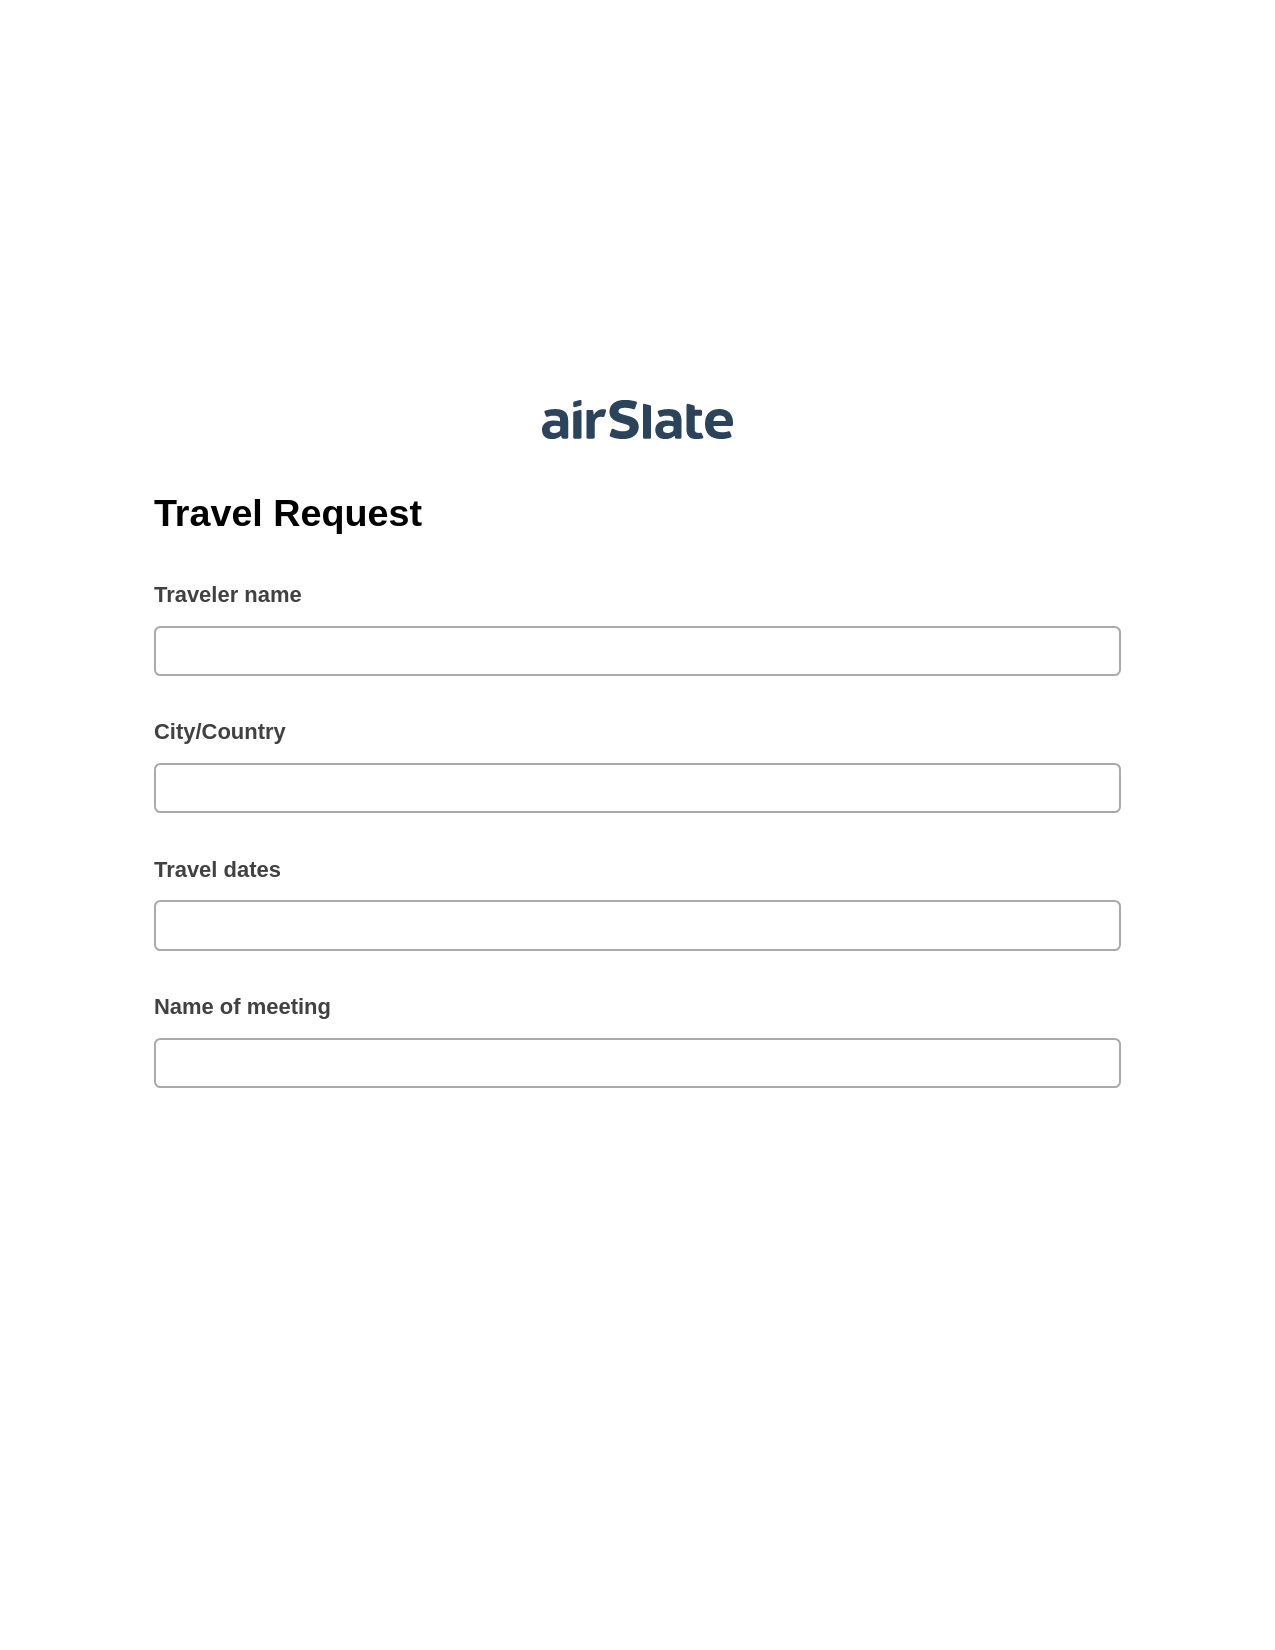 Travel Request Pre-fill Dropdown from Airtable, Webhook Bot, Dropbox Bot